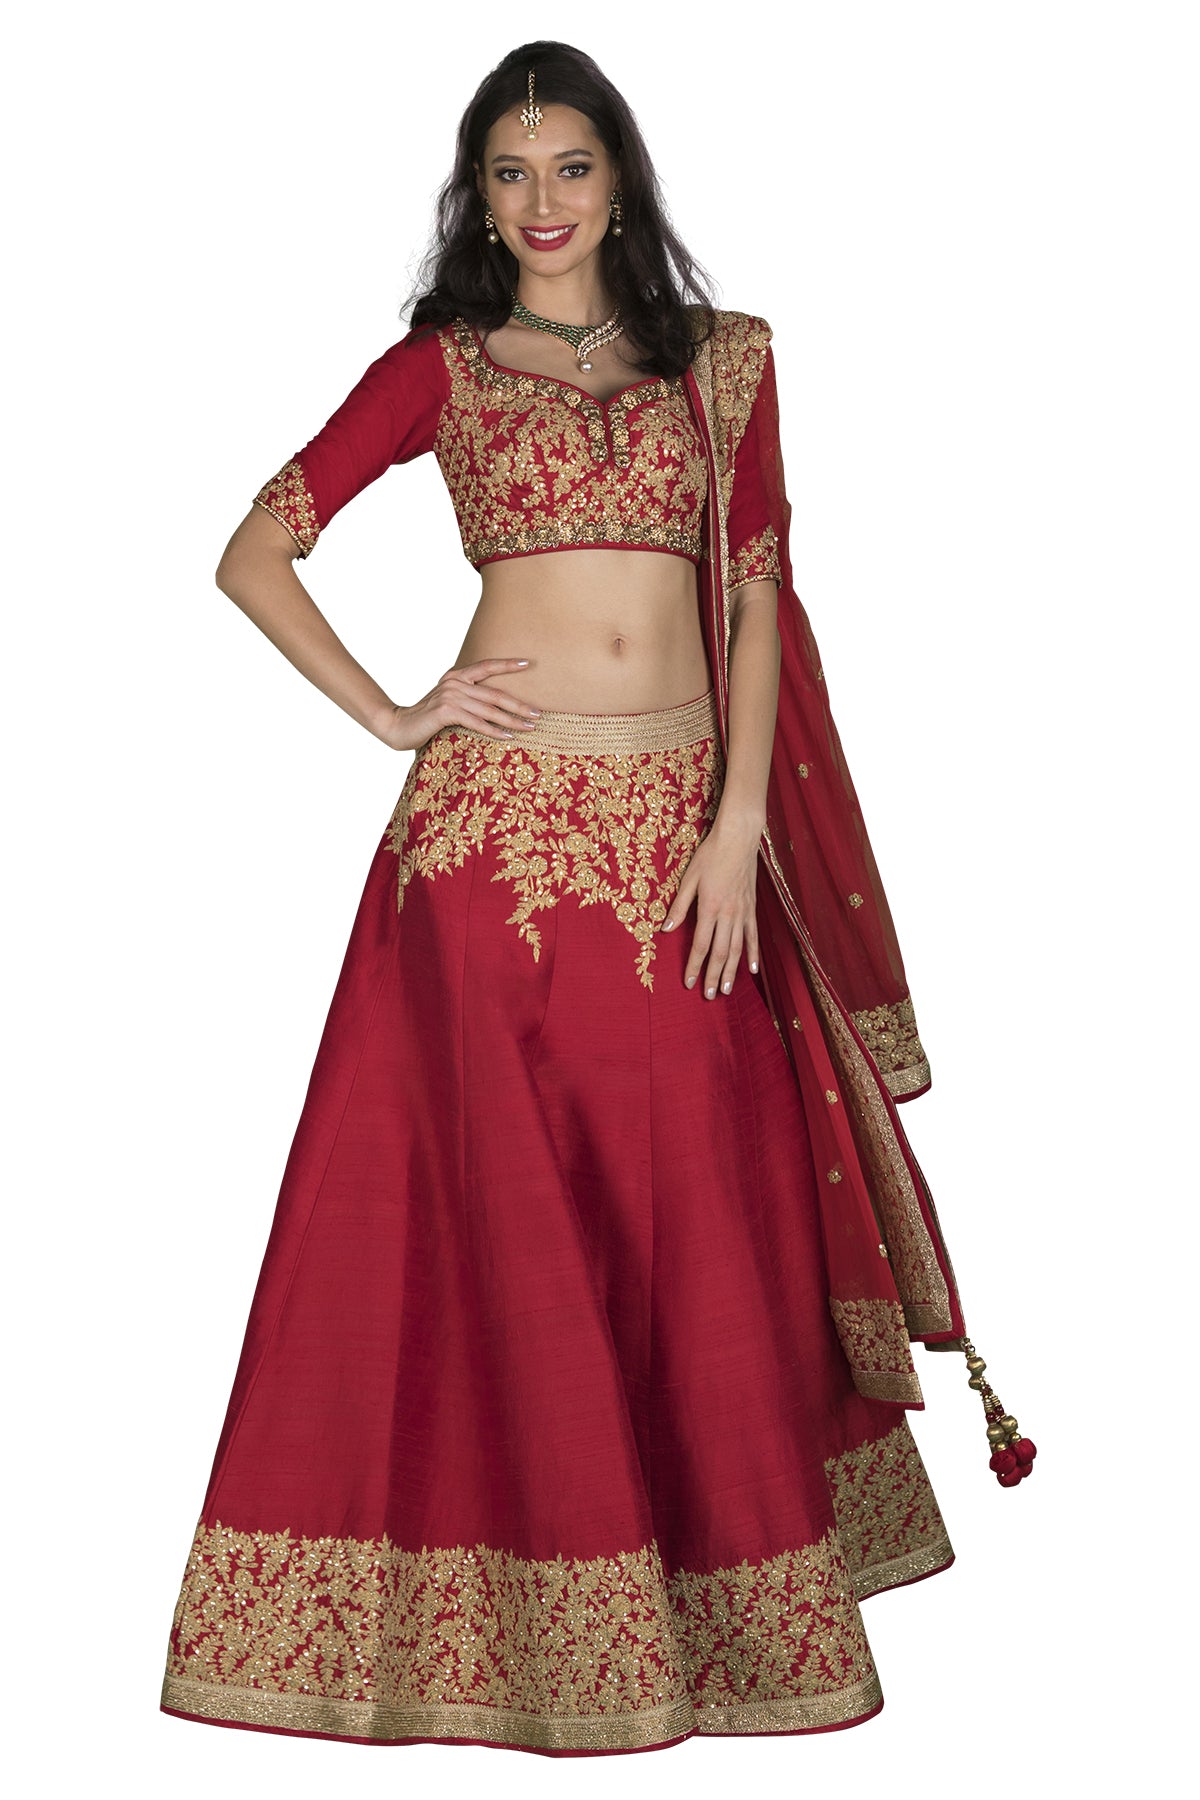 Red lehenga with gold machine work is the perfect lehenga for the bride or the bride's sister
